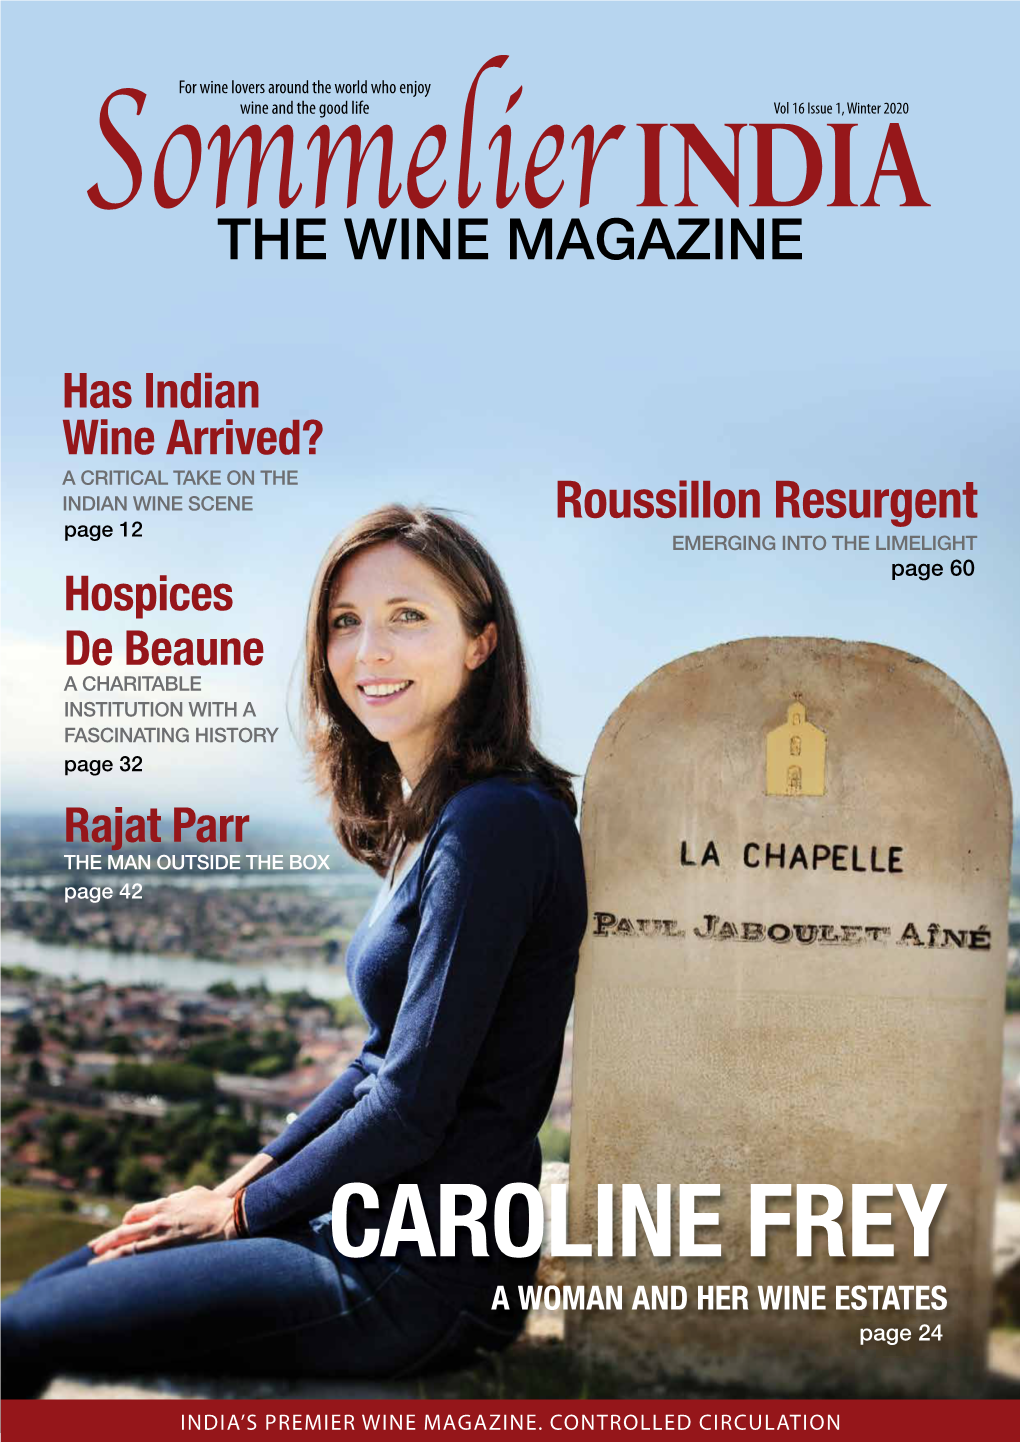 CAROLINE FREY a WOMAN and HER WINE ESTATES Page 24